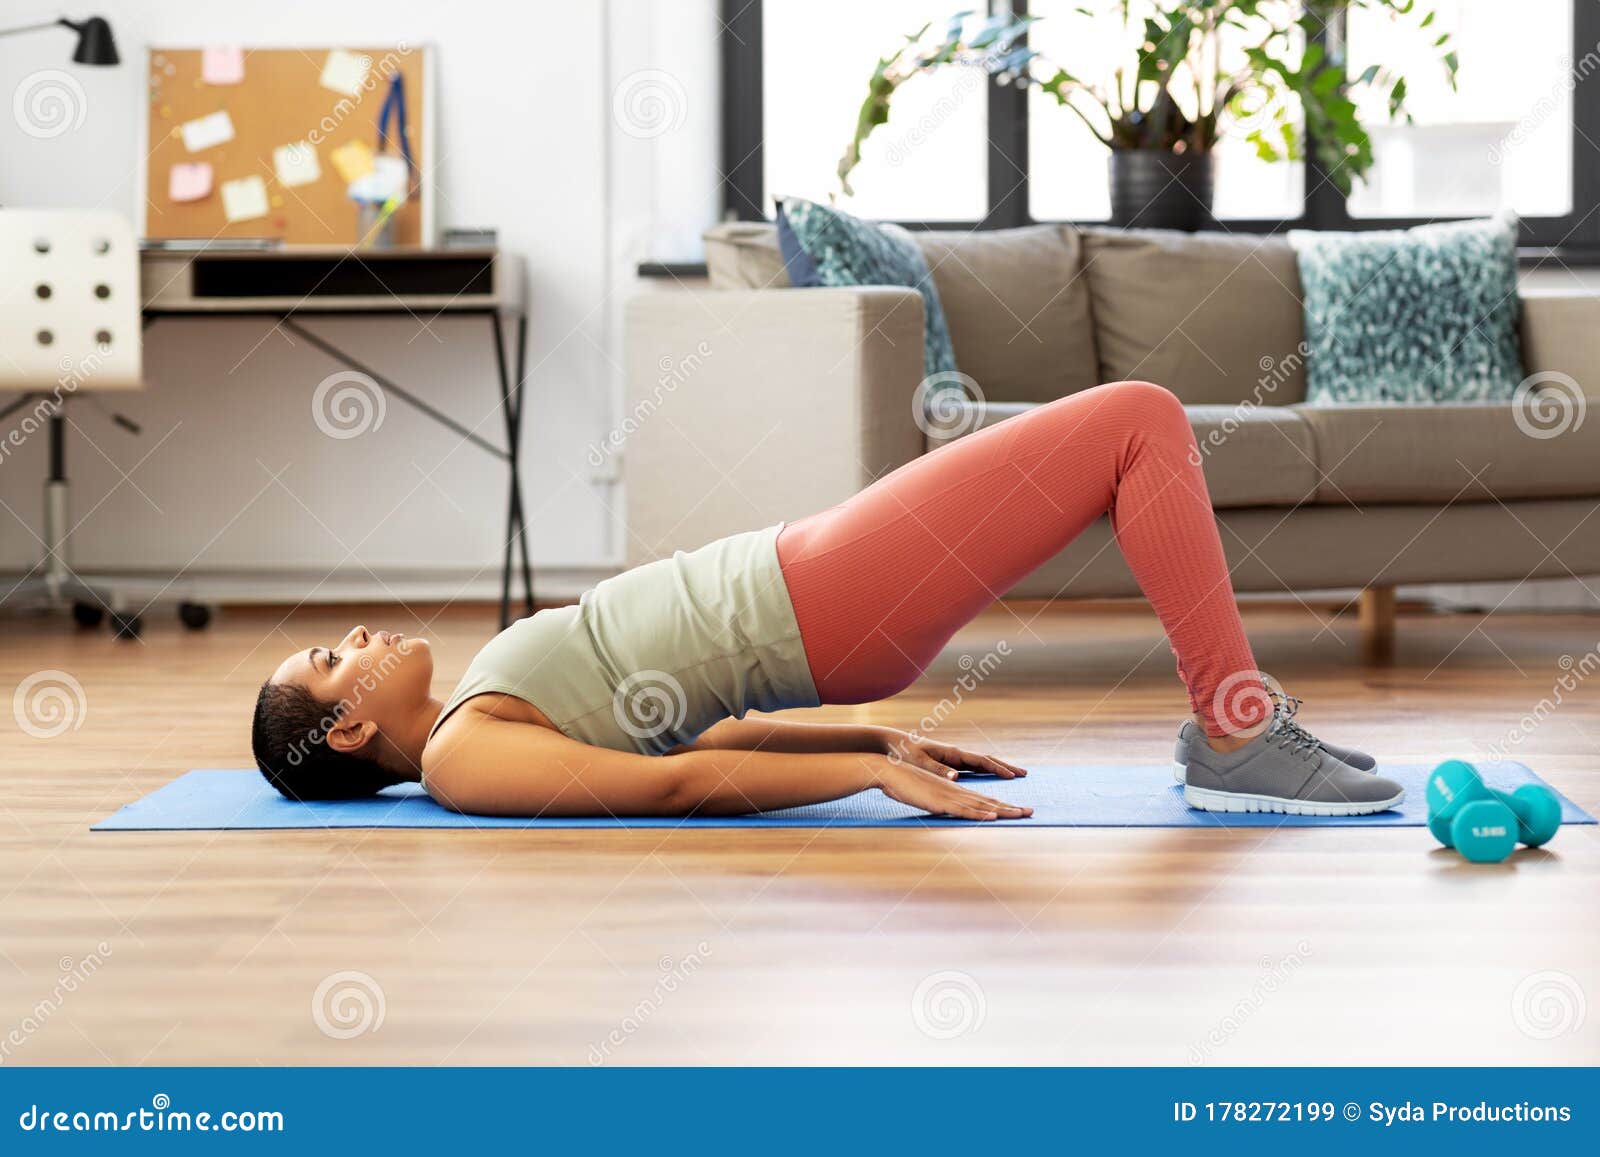 woman doing pelvic lift abdominal exercise at home